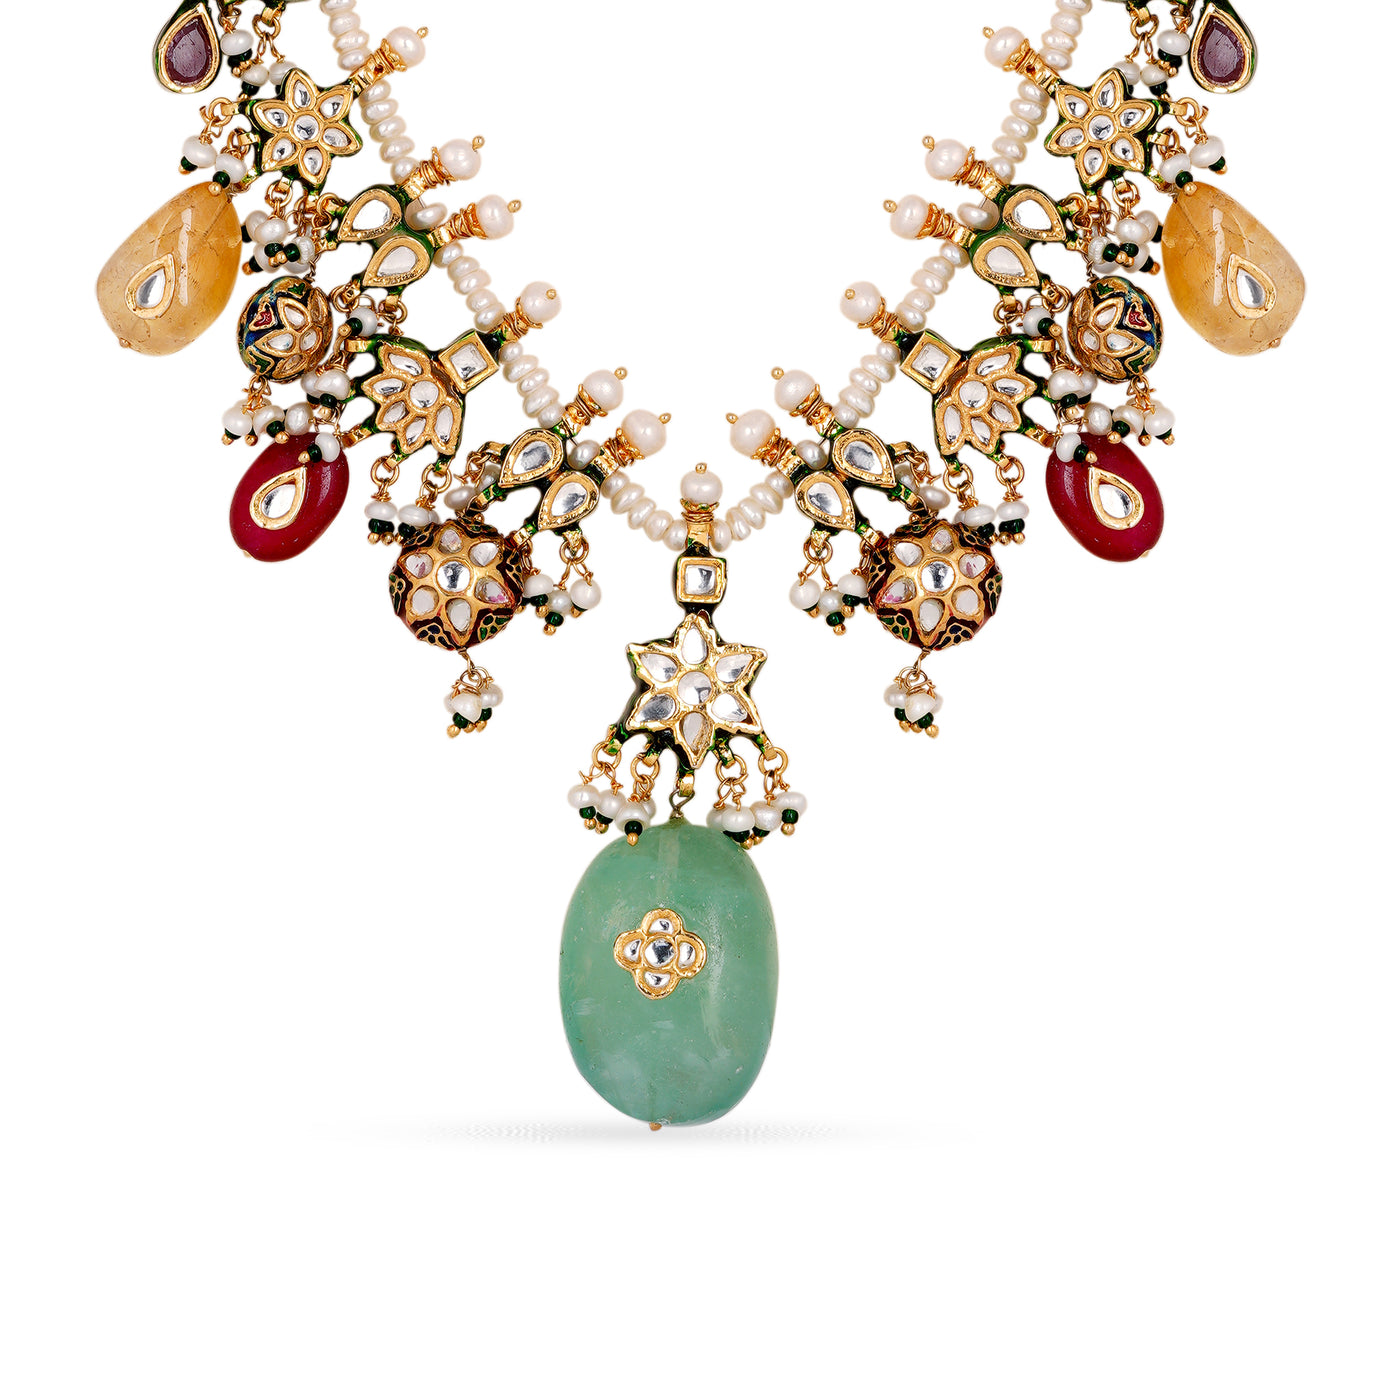 Gold plated silver mix base metal kundan necklace and earrings set with real pearls and Fluorite, Rose Quartz, Citrine, Amethyst and Baroque pearls . The set has hand-painted meenakari work at the back of the set.